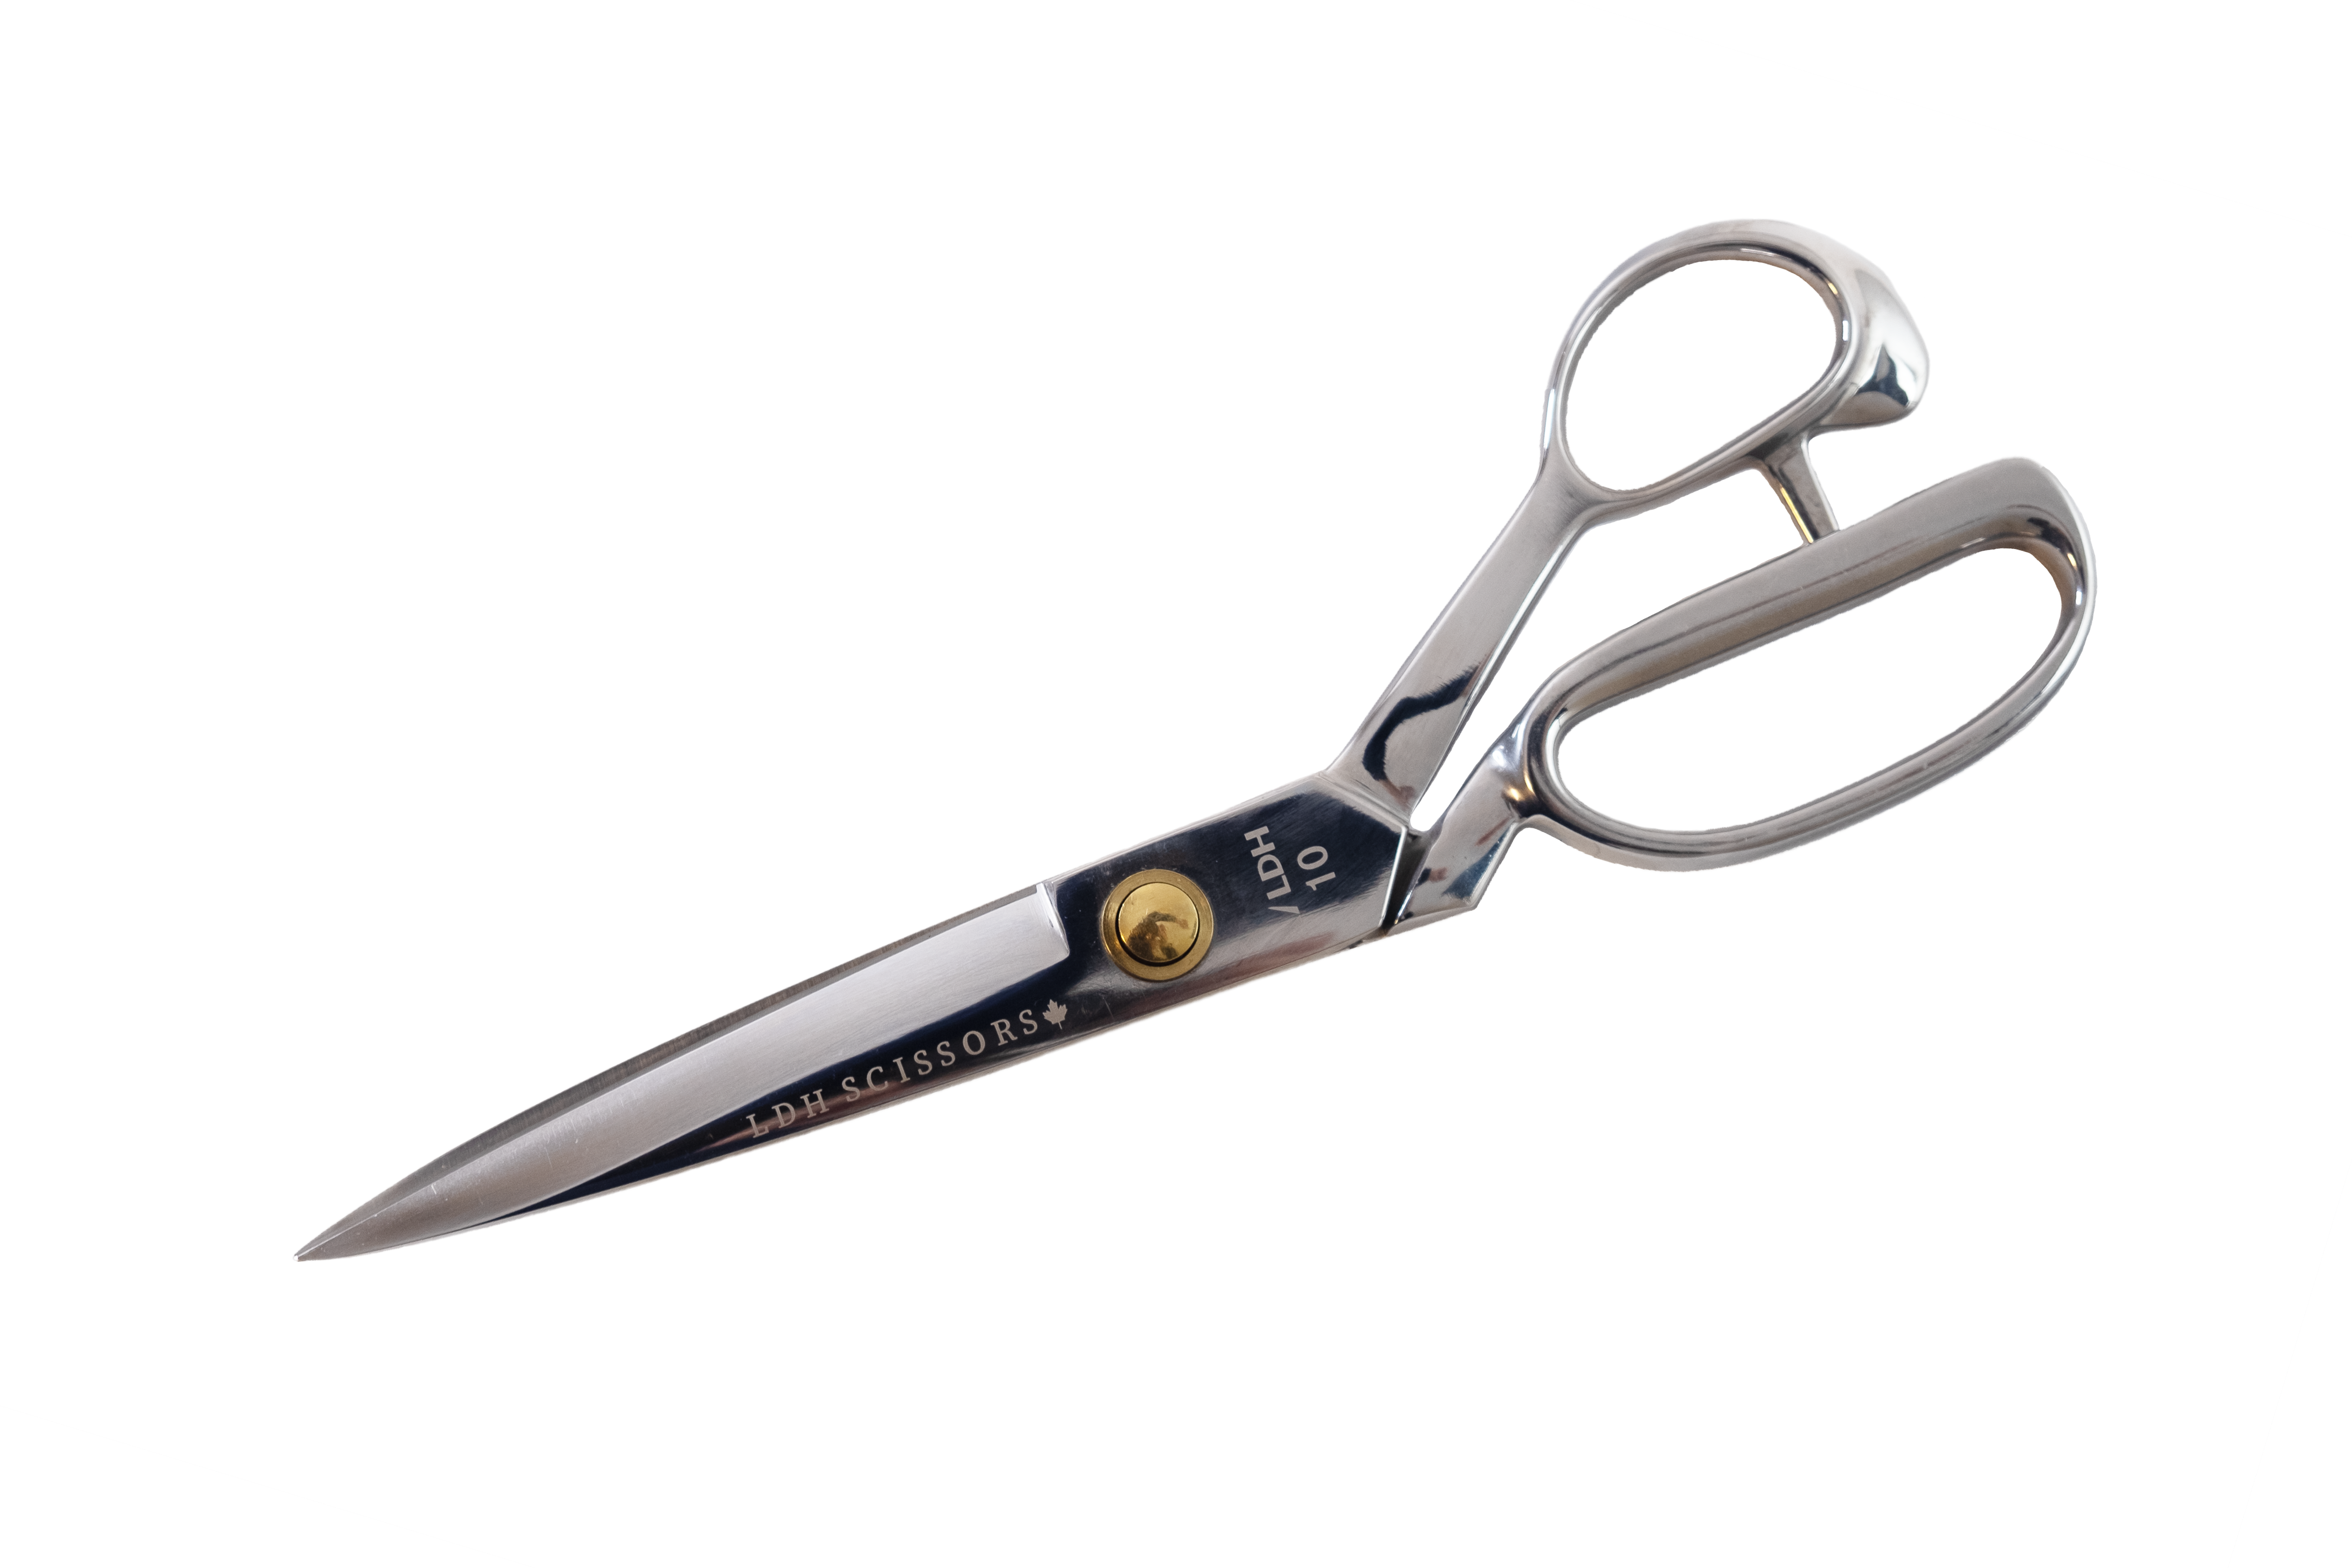 Classic Stainless Steel Fabric Shears - LDH Scissors 